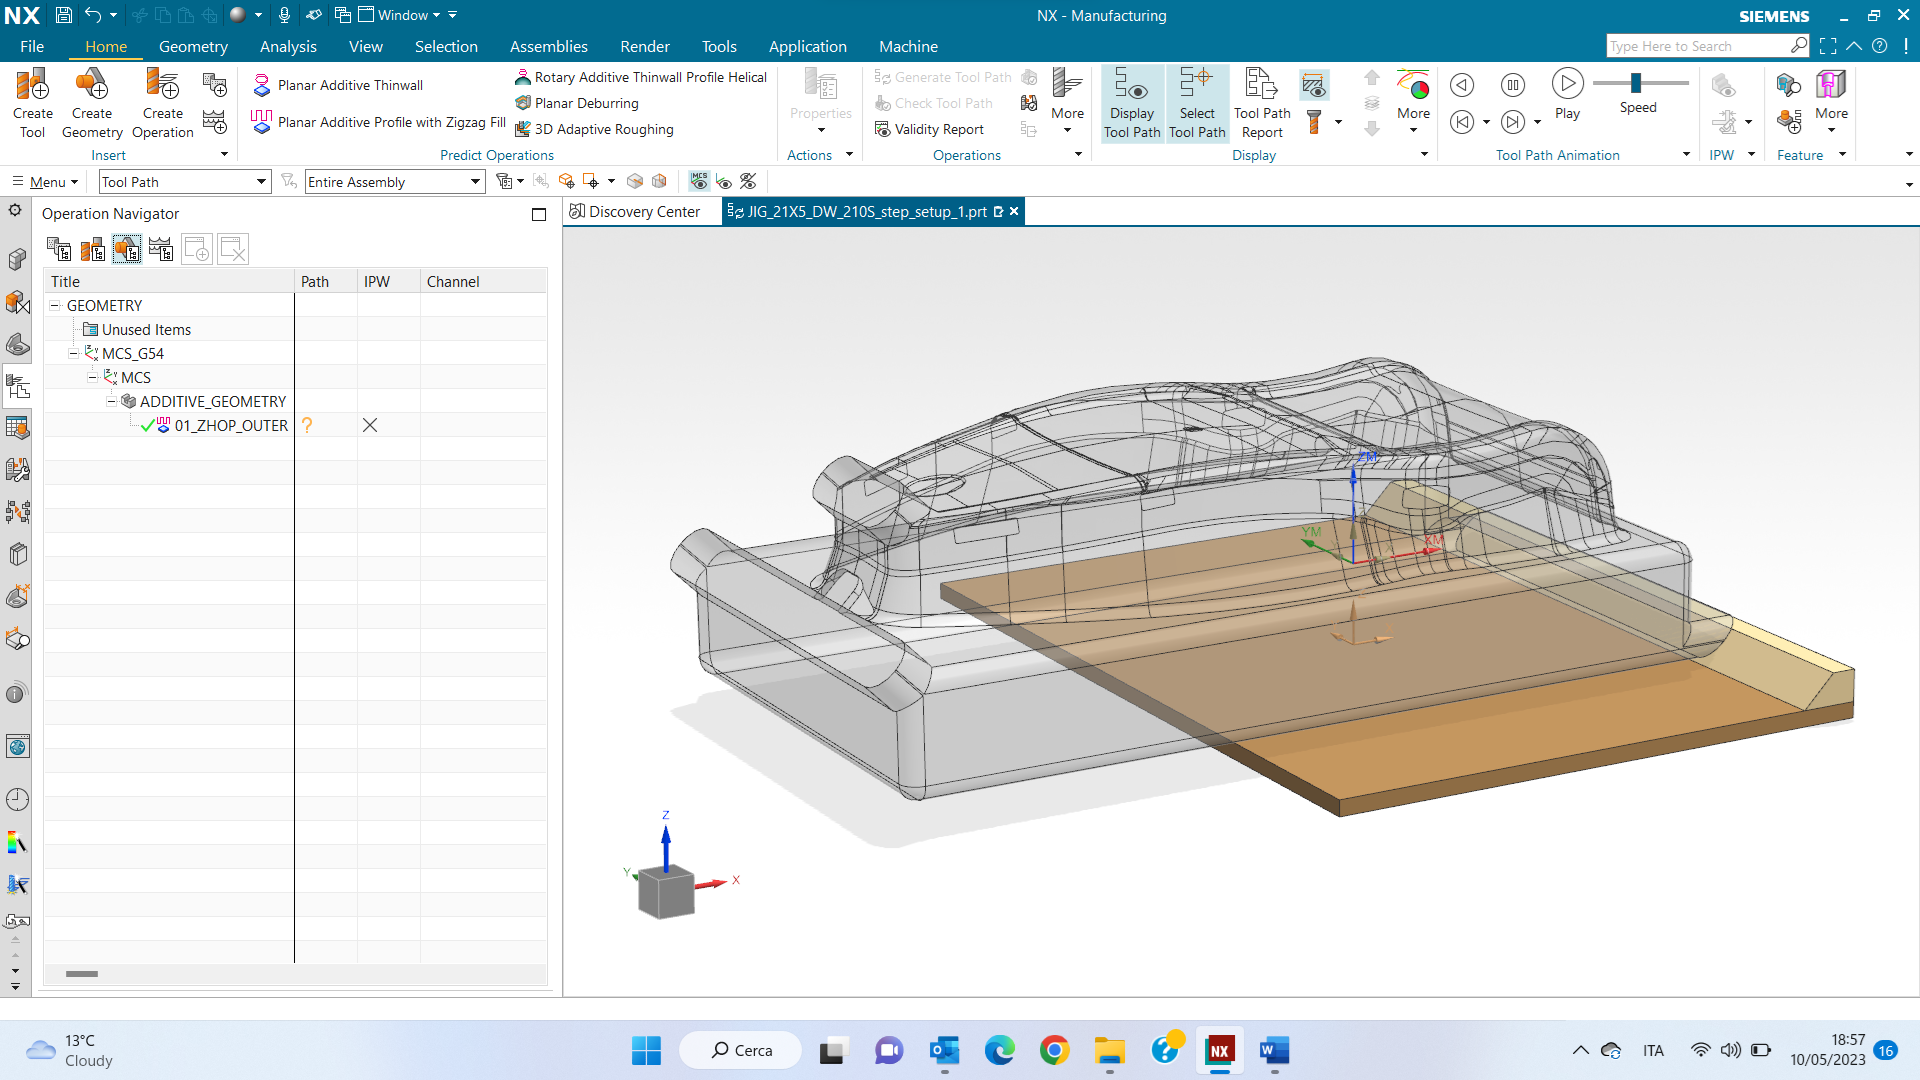  Siemens NX for additive manufacturing